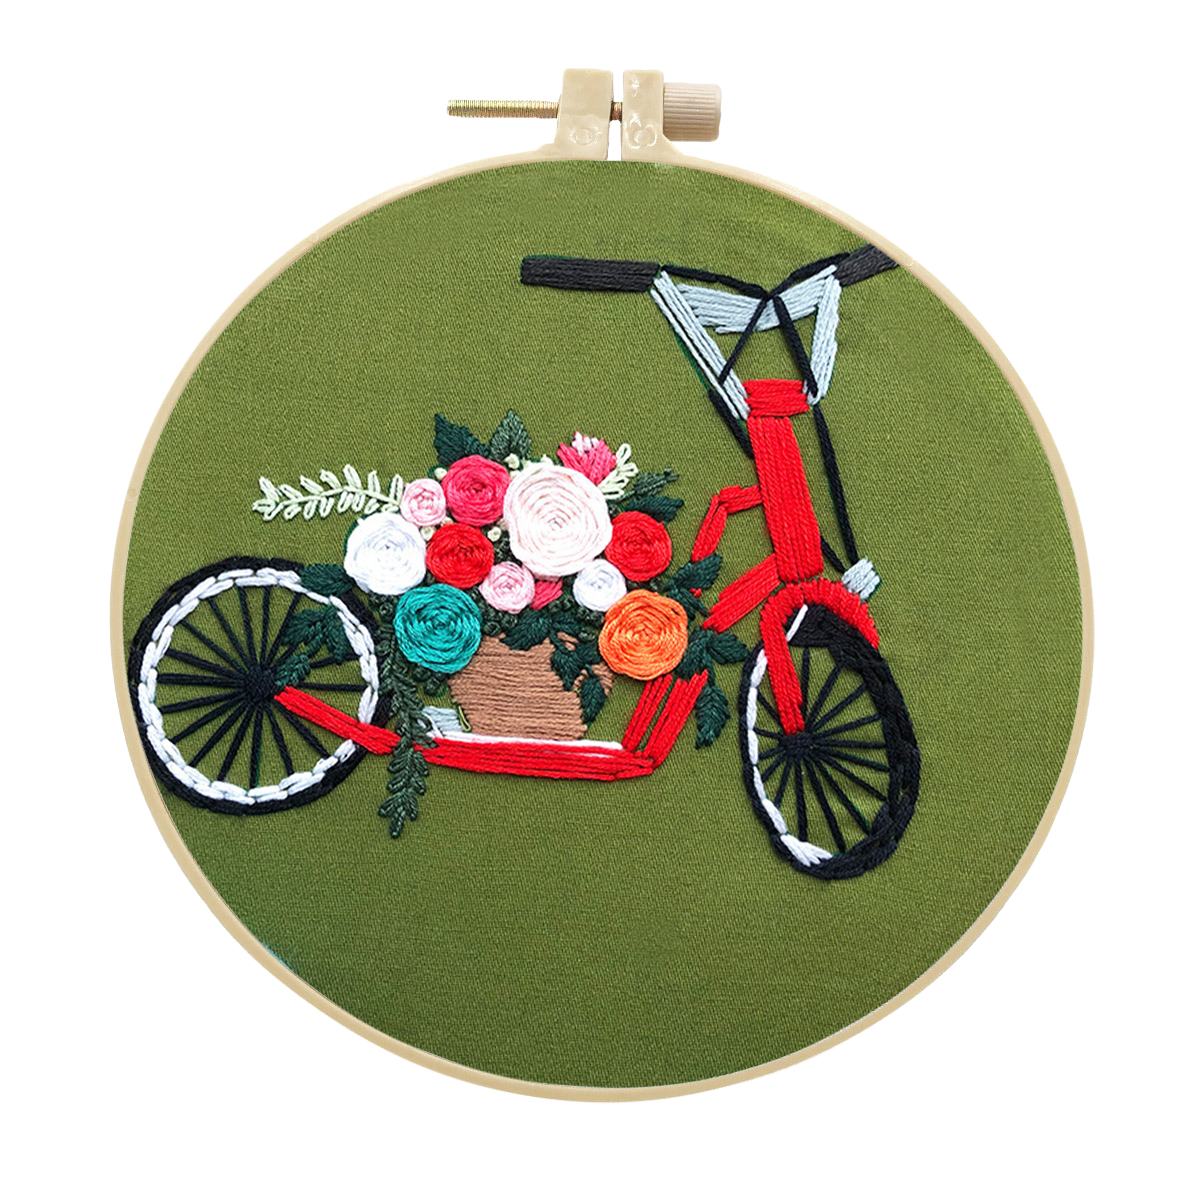 DIY Craft Handmade Embroidery kit for Adult - Bicycle with Flowers Pattern